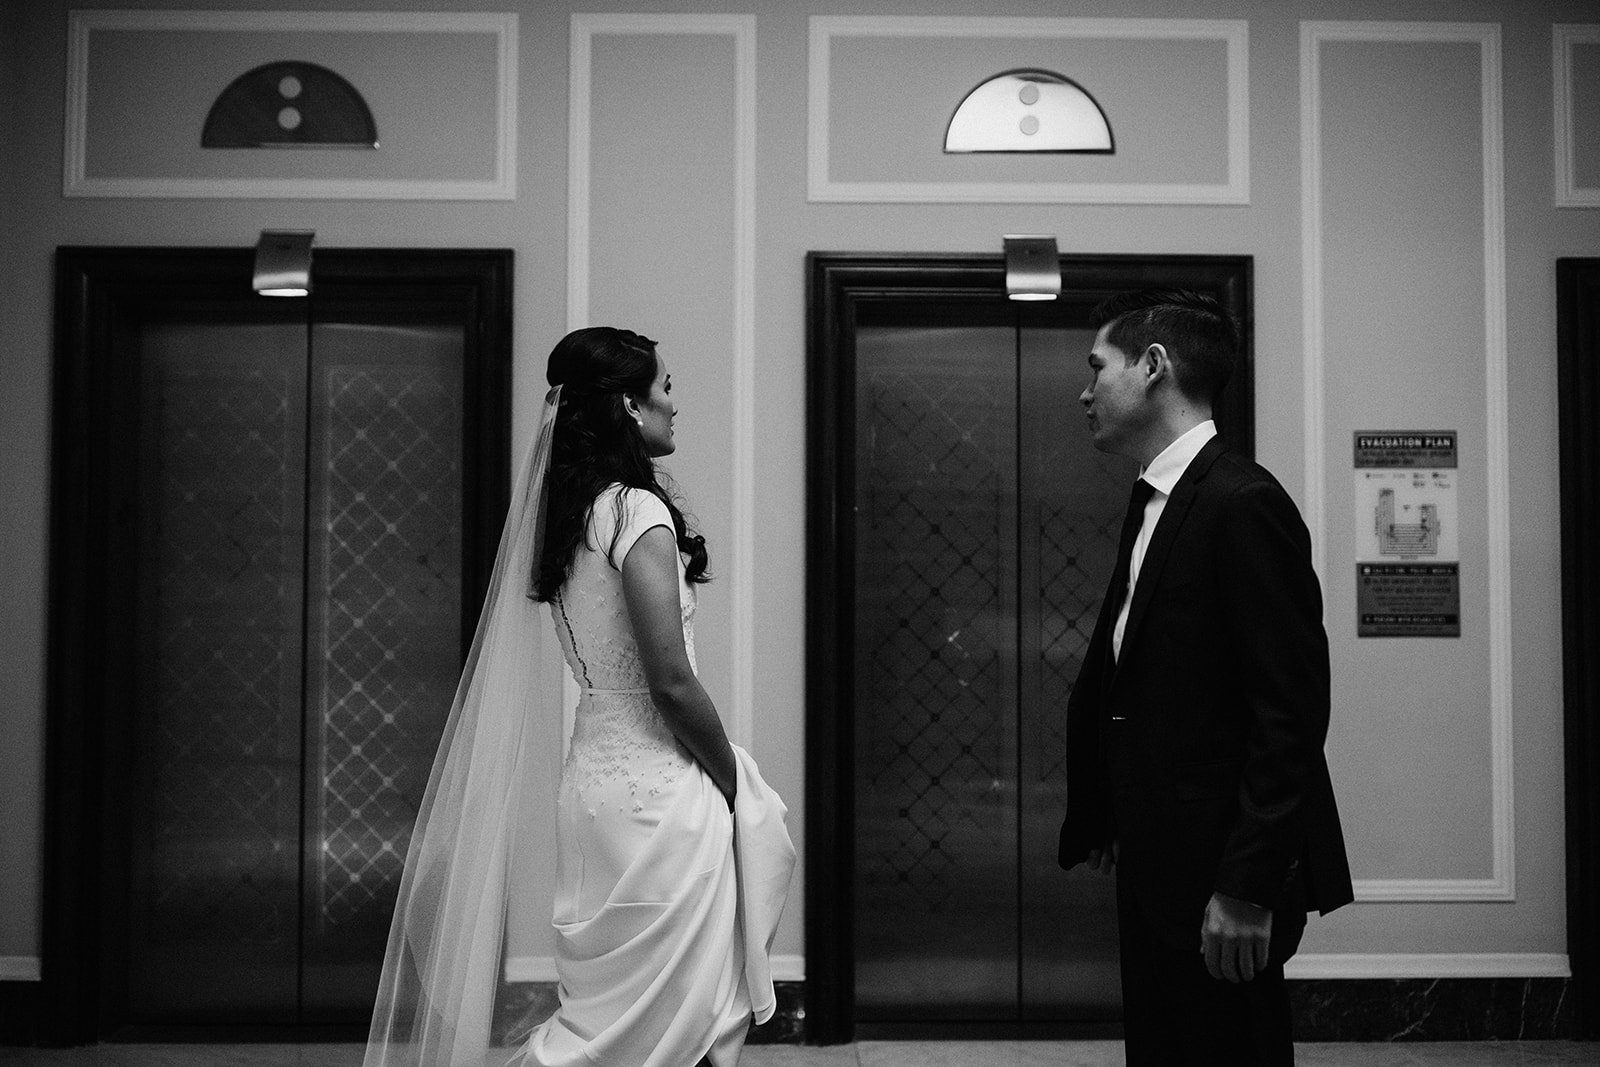  bride and groom waiting for an elevator  